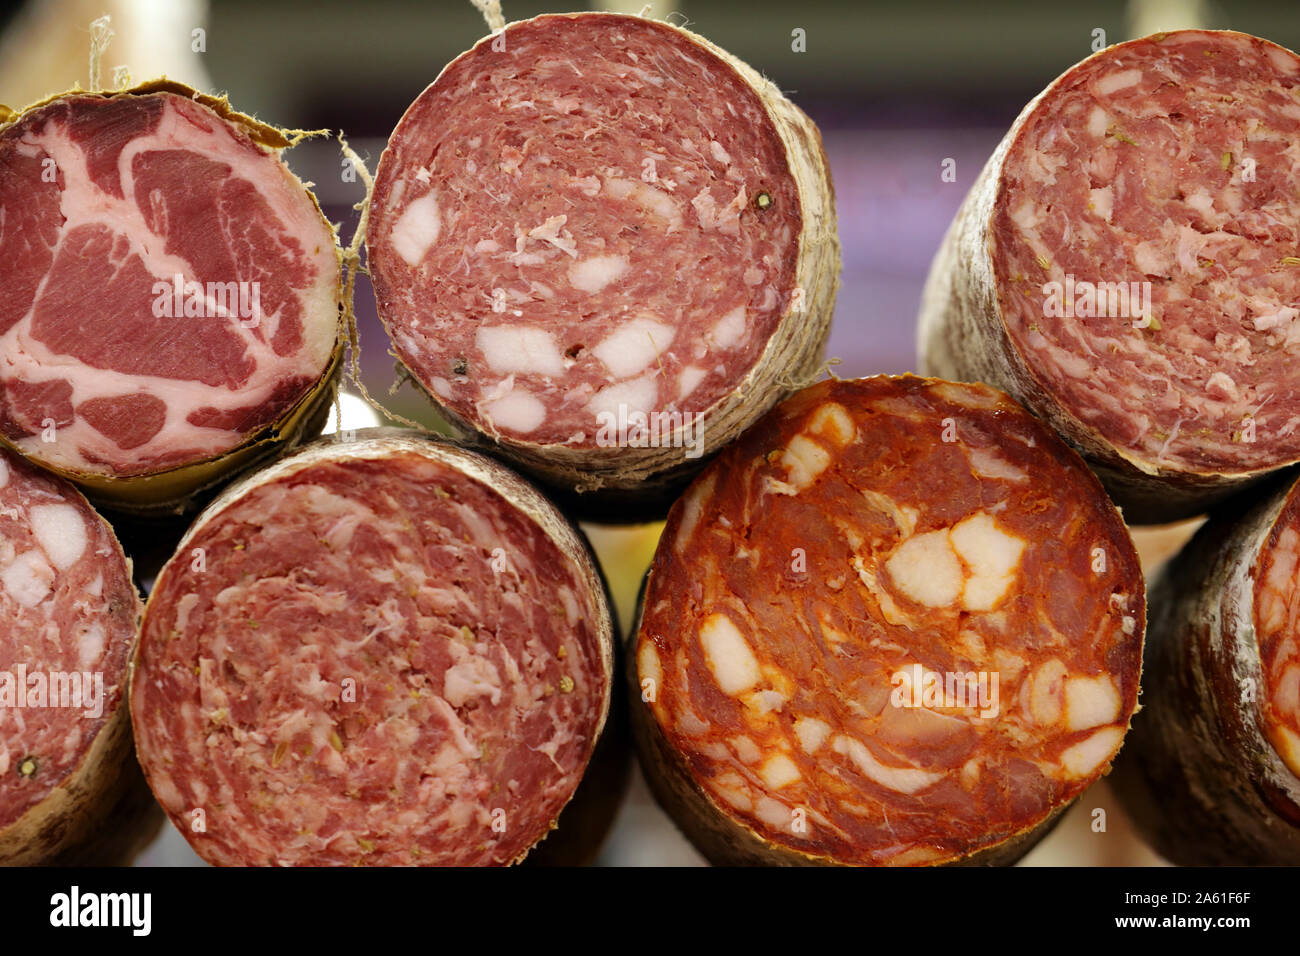 28 market the photography images stock - Salami Page hi-res and Alamy at -